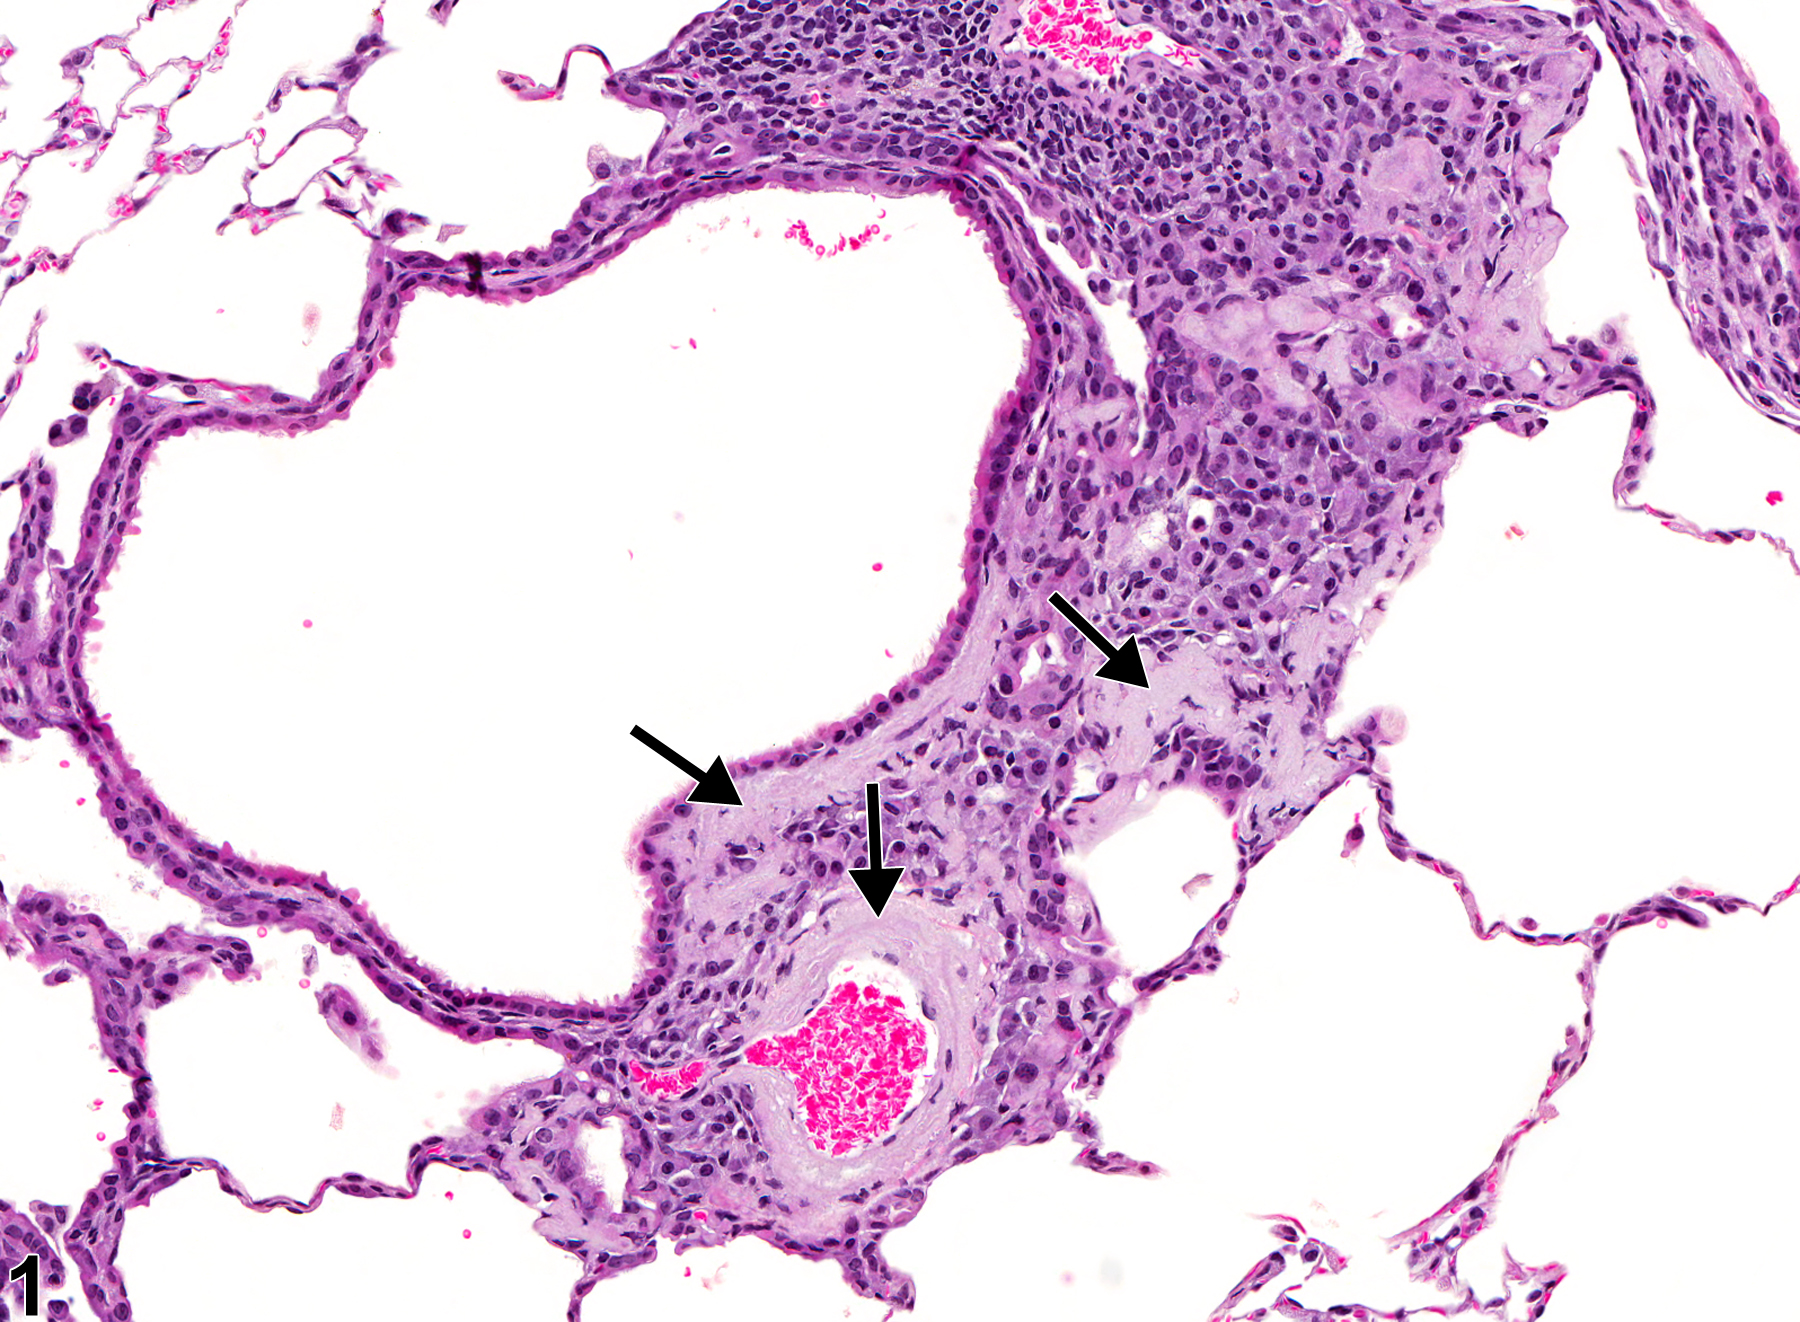 Image of amyloid in the lung from a female B6C3F1/N mouse in a chronic study